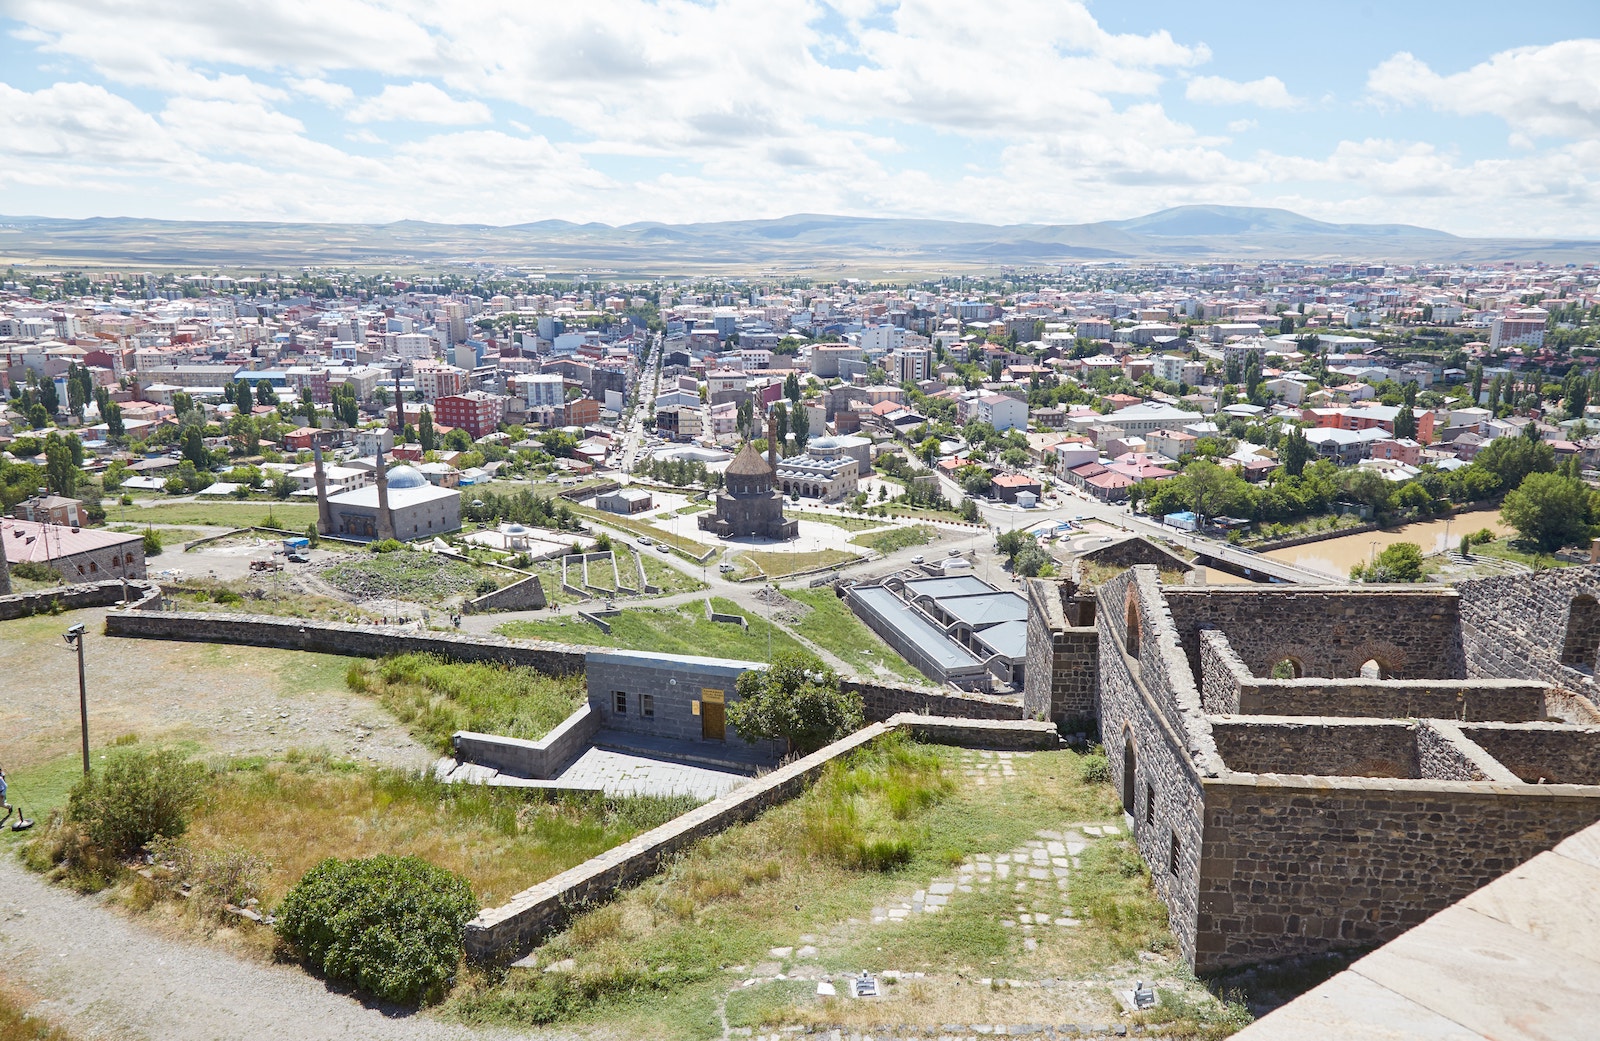 A Day in Kars: Exploring Turkey's Eastern Frontier - Sailingstone Travel